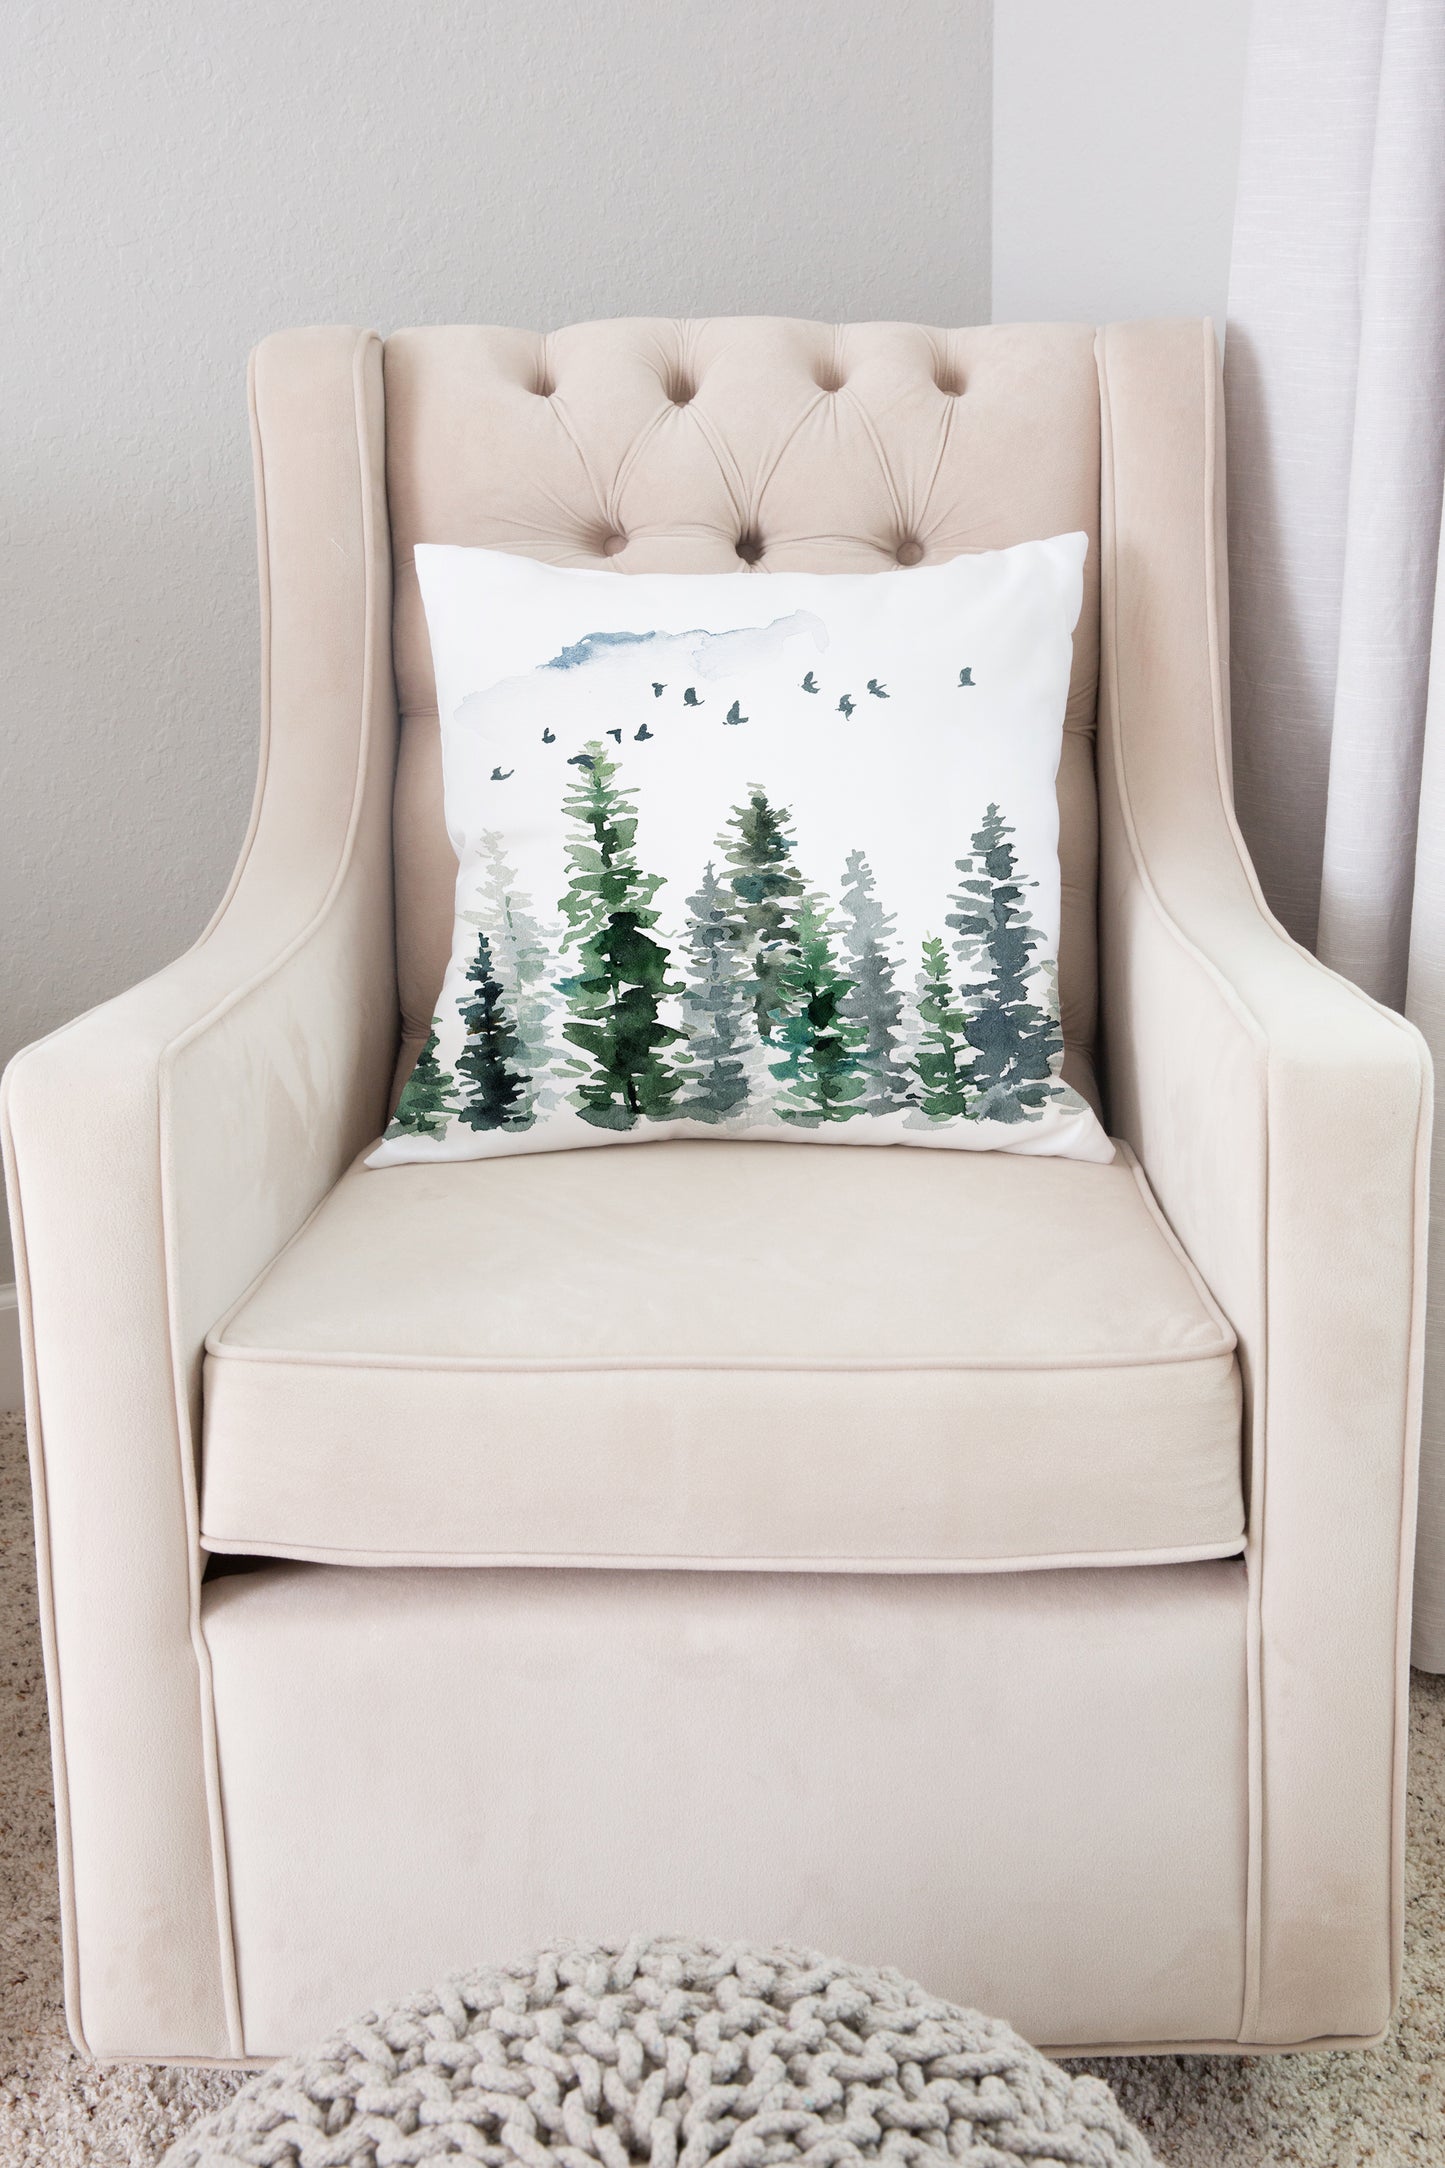 Pine Trees Pillow, Forest Nursery Decor - Enchanted Forest